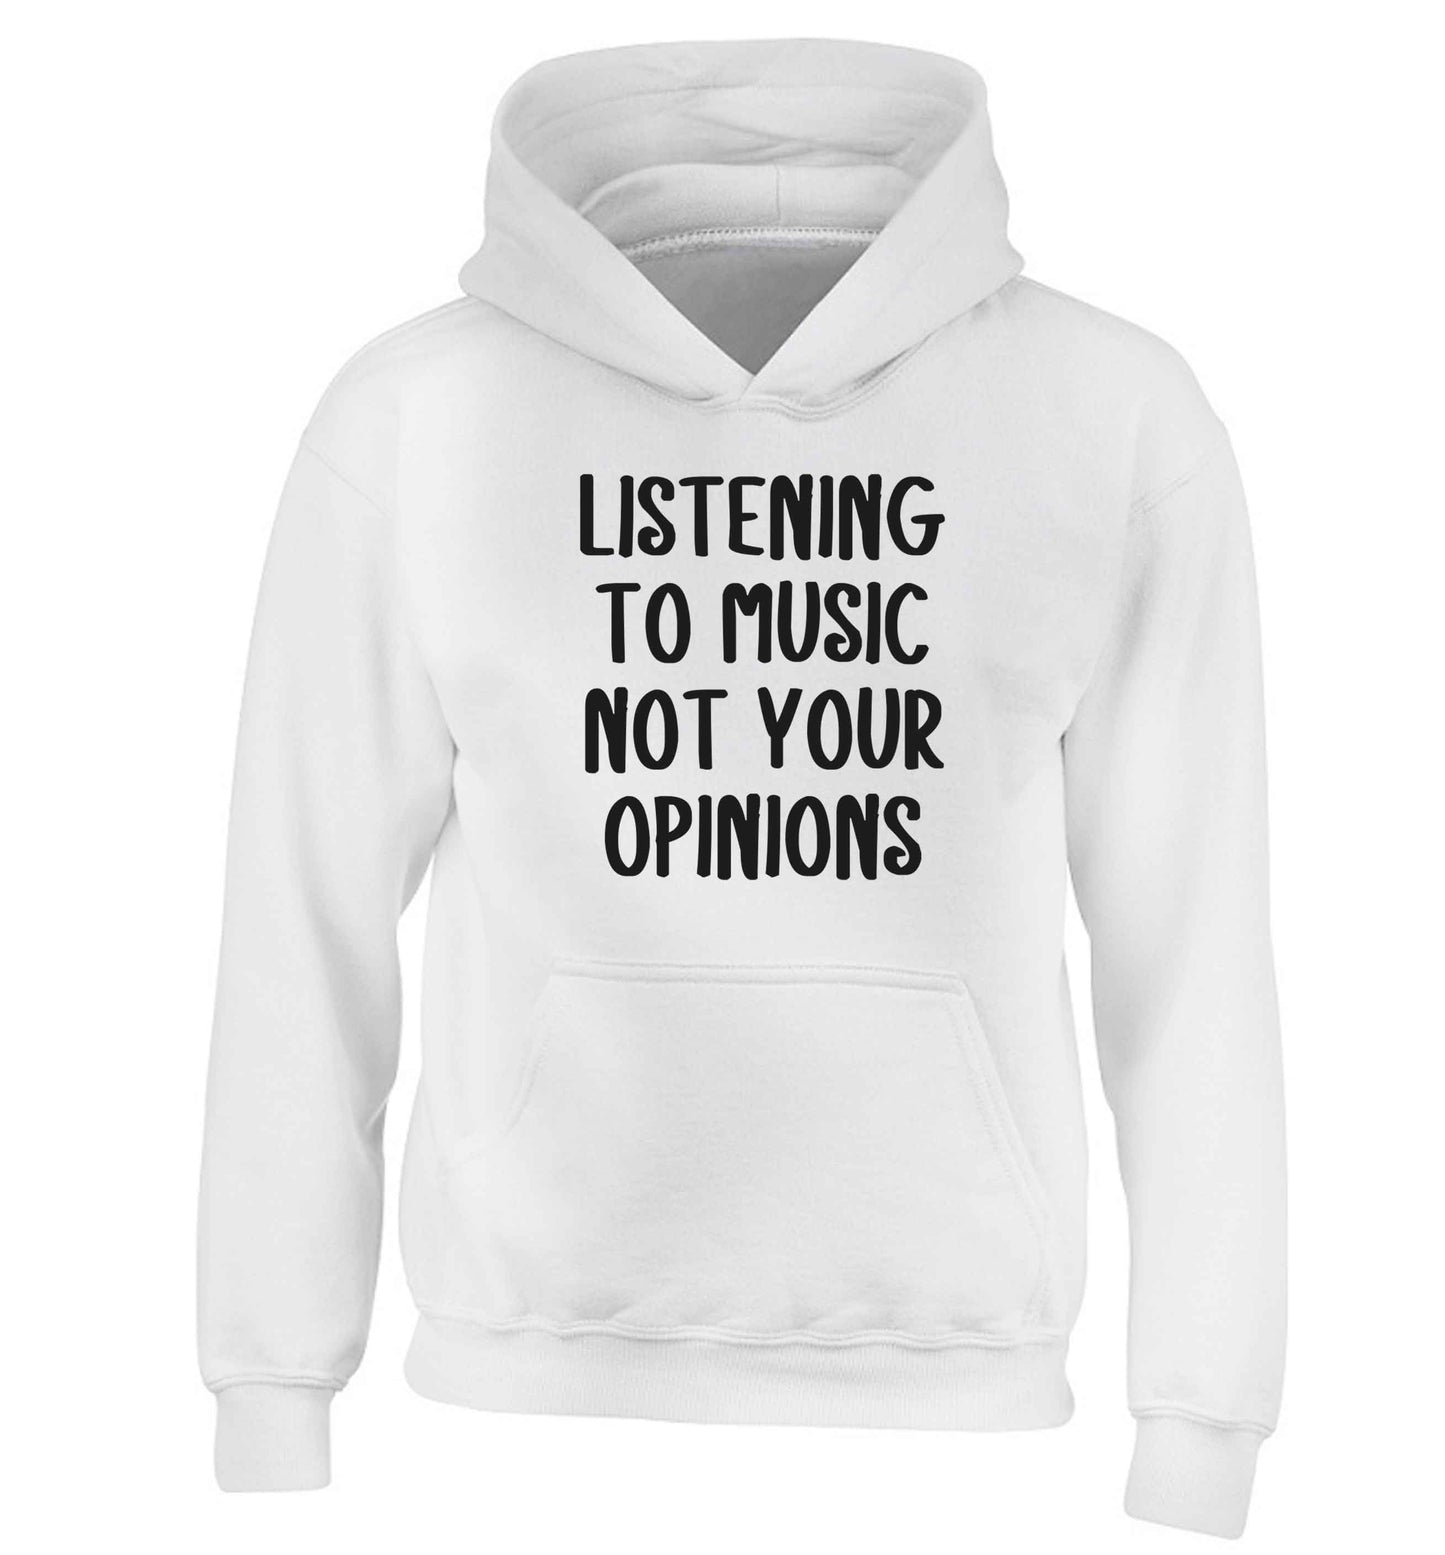 Listening to music not your opinions children's white hoodie 12-13 Years